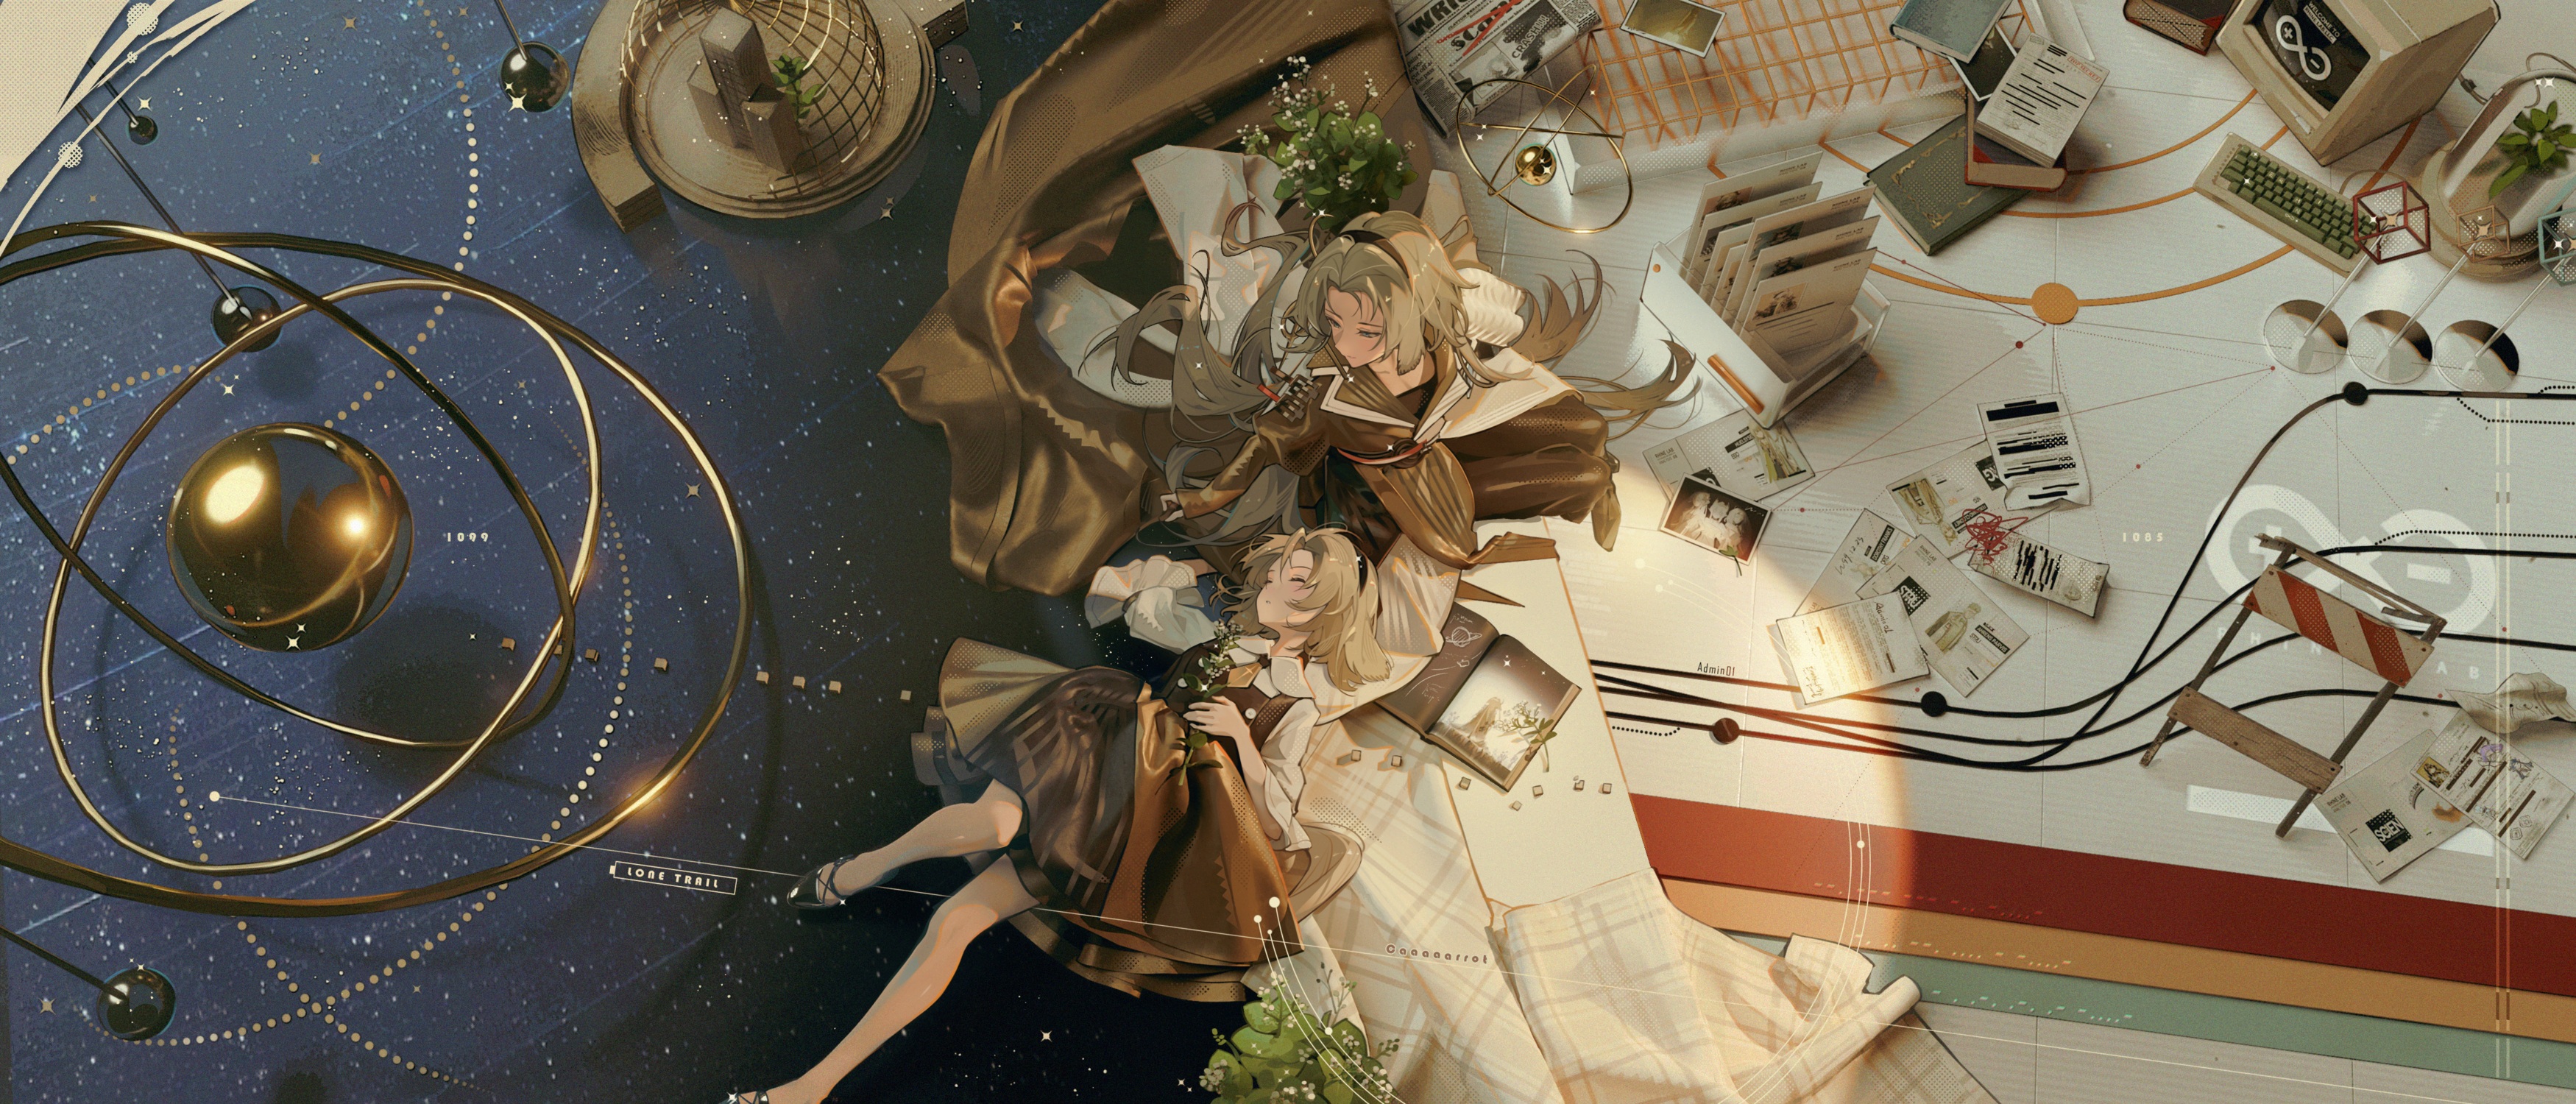 Anime 3500x1500 anime anime girls lying down lying on back closed eyes closed mouth anime boys parted lips short hair long hair computer keyboards Arknights Caaaaarrot mechanical keyboard Ho'olheyak (Arknights) Magallan (Arknights) Saria (Arknights) gloves stockings Ifrit (Arknights) Silence(Arknights) sleeping dress Kristen (Arknights) frills Muelsyse (Arknights) Typhon (Arknights) blonde Valarqvin (Arknights) leaves